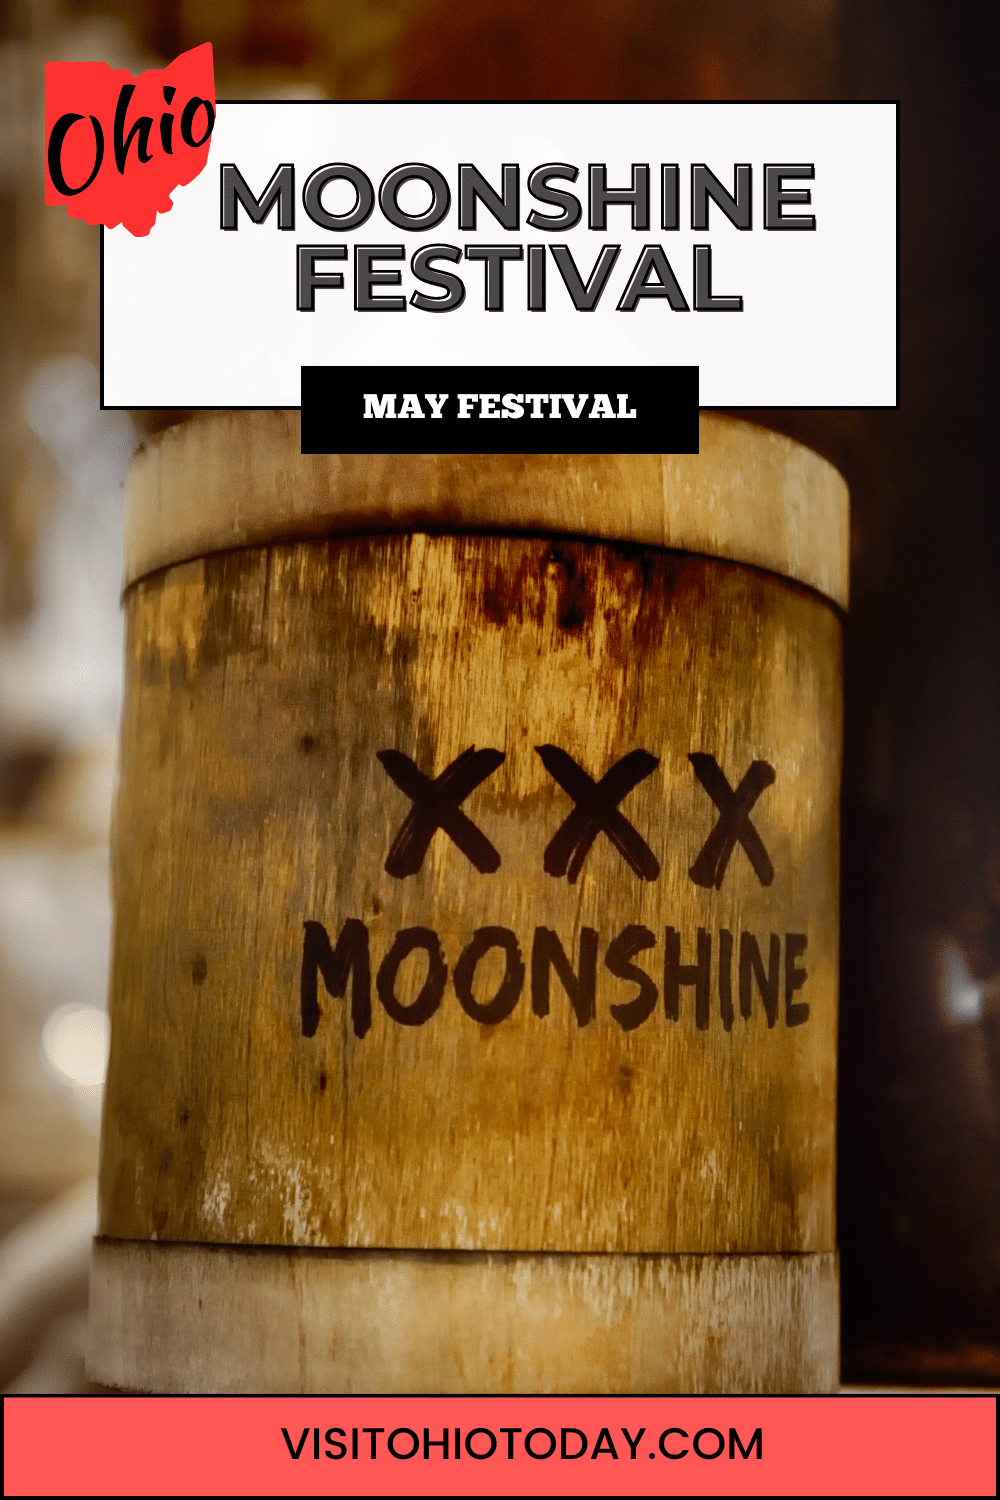 The 53rd annual Moonshine Festival occurs on Memorial Day weekend in New Straitsville.